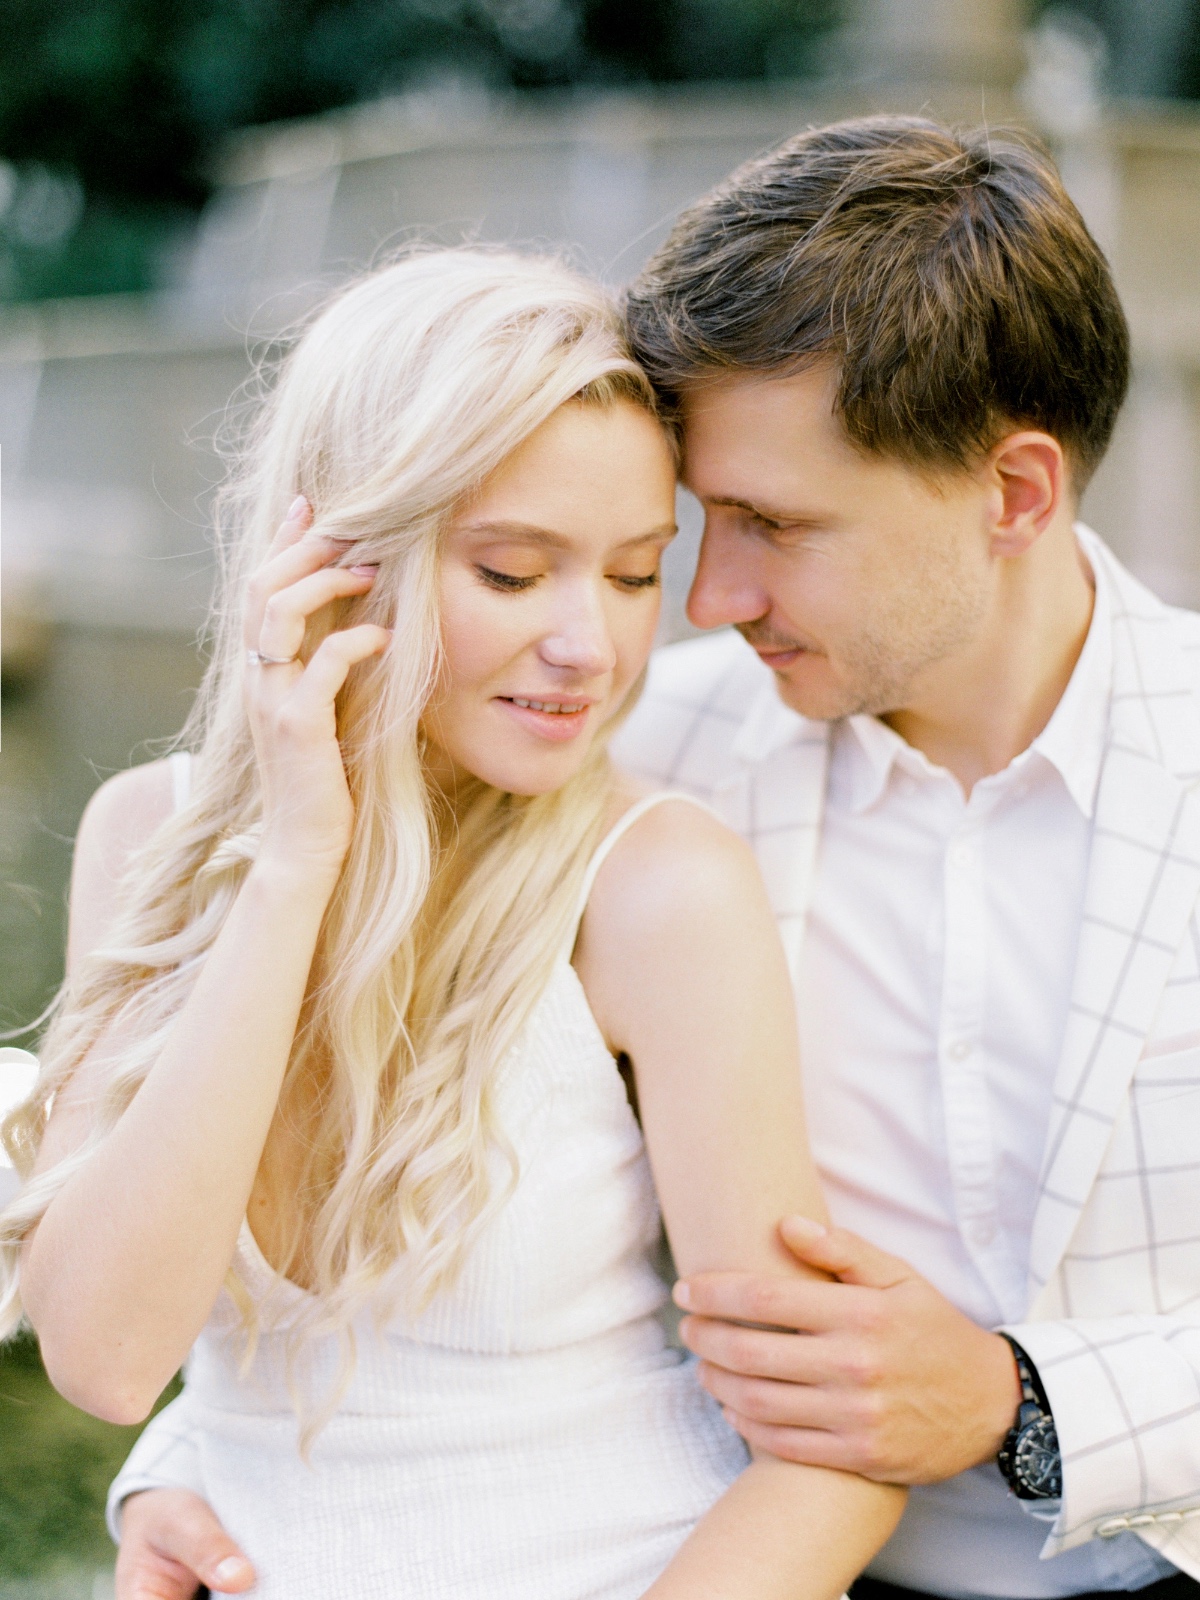 New York engagement session location ideas at Pulitzer Fountain